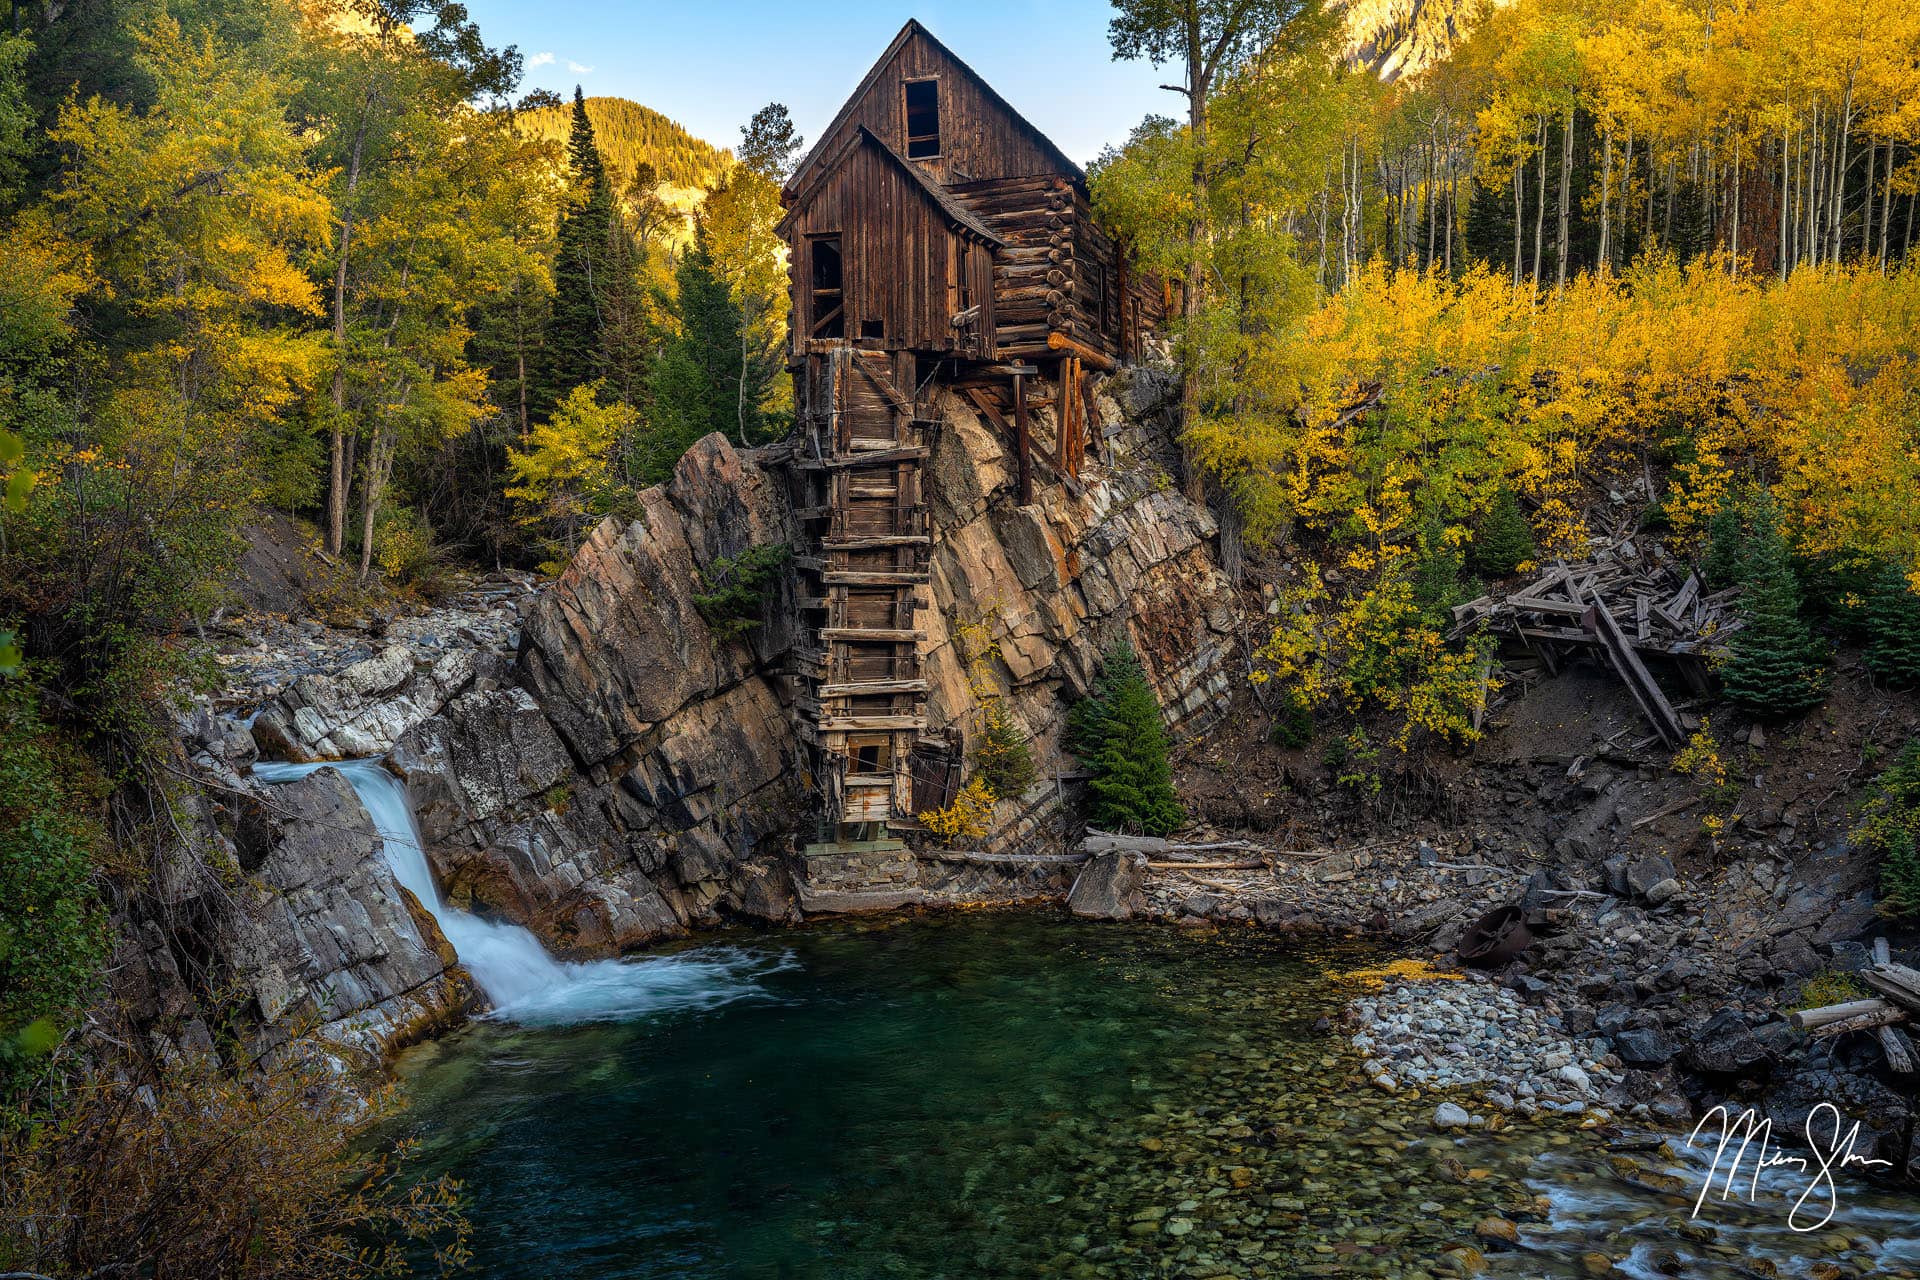 Crystal Mill Photography for sale: Fine Art Prints of the Crystal Mill and nearby areas